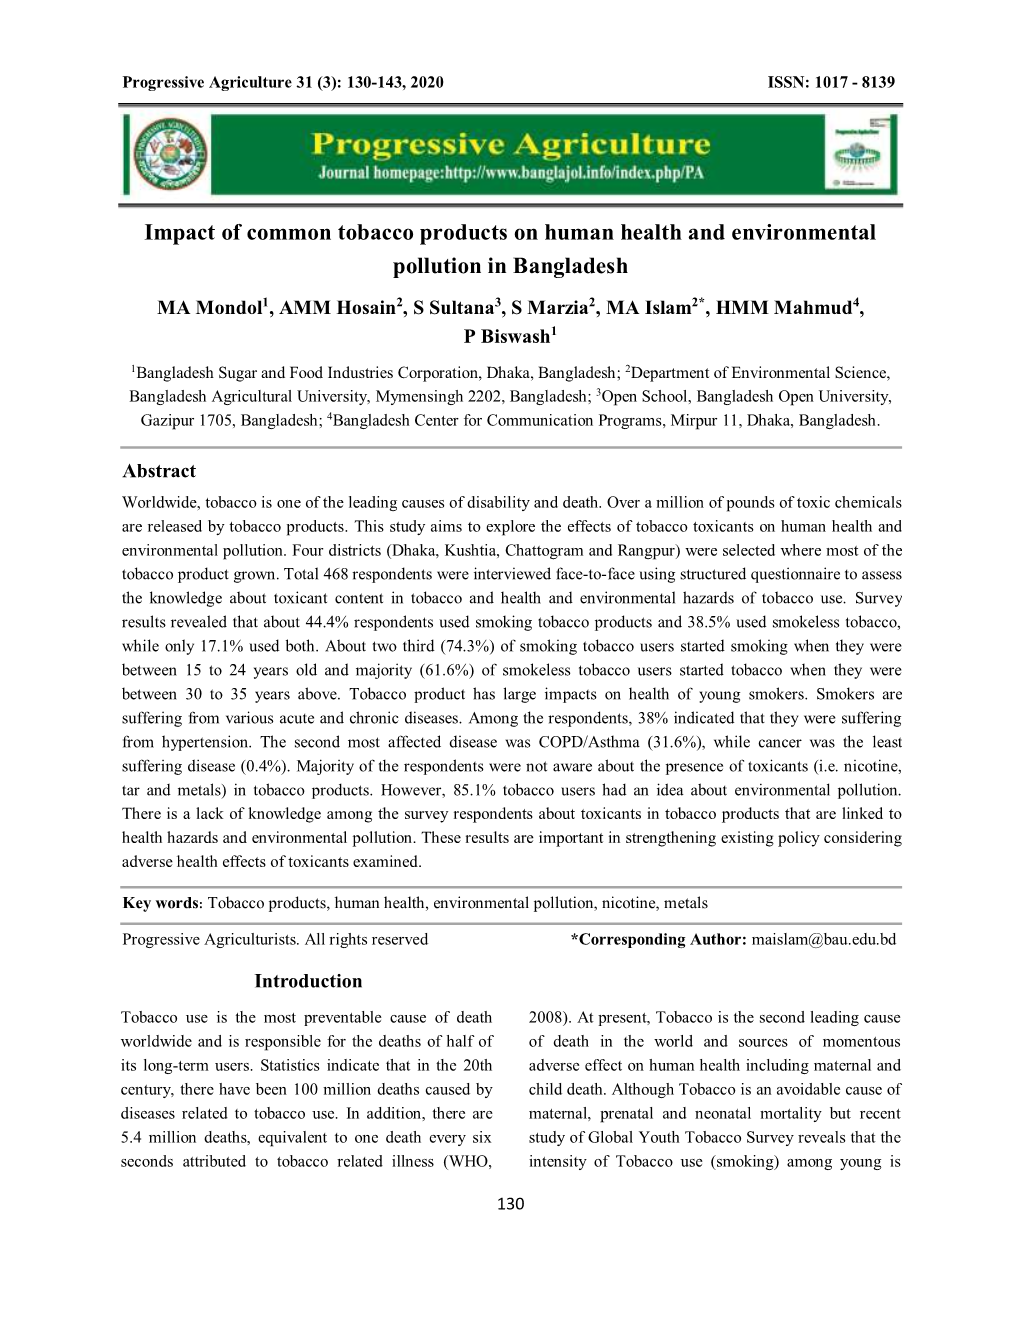 Impact of Common Tobacco Products on Human Health and Environmental Pollution in Bangladesh